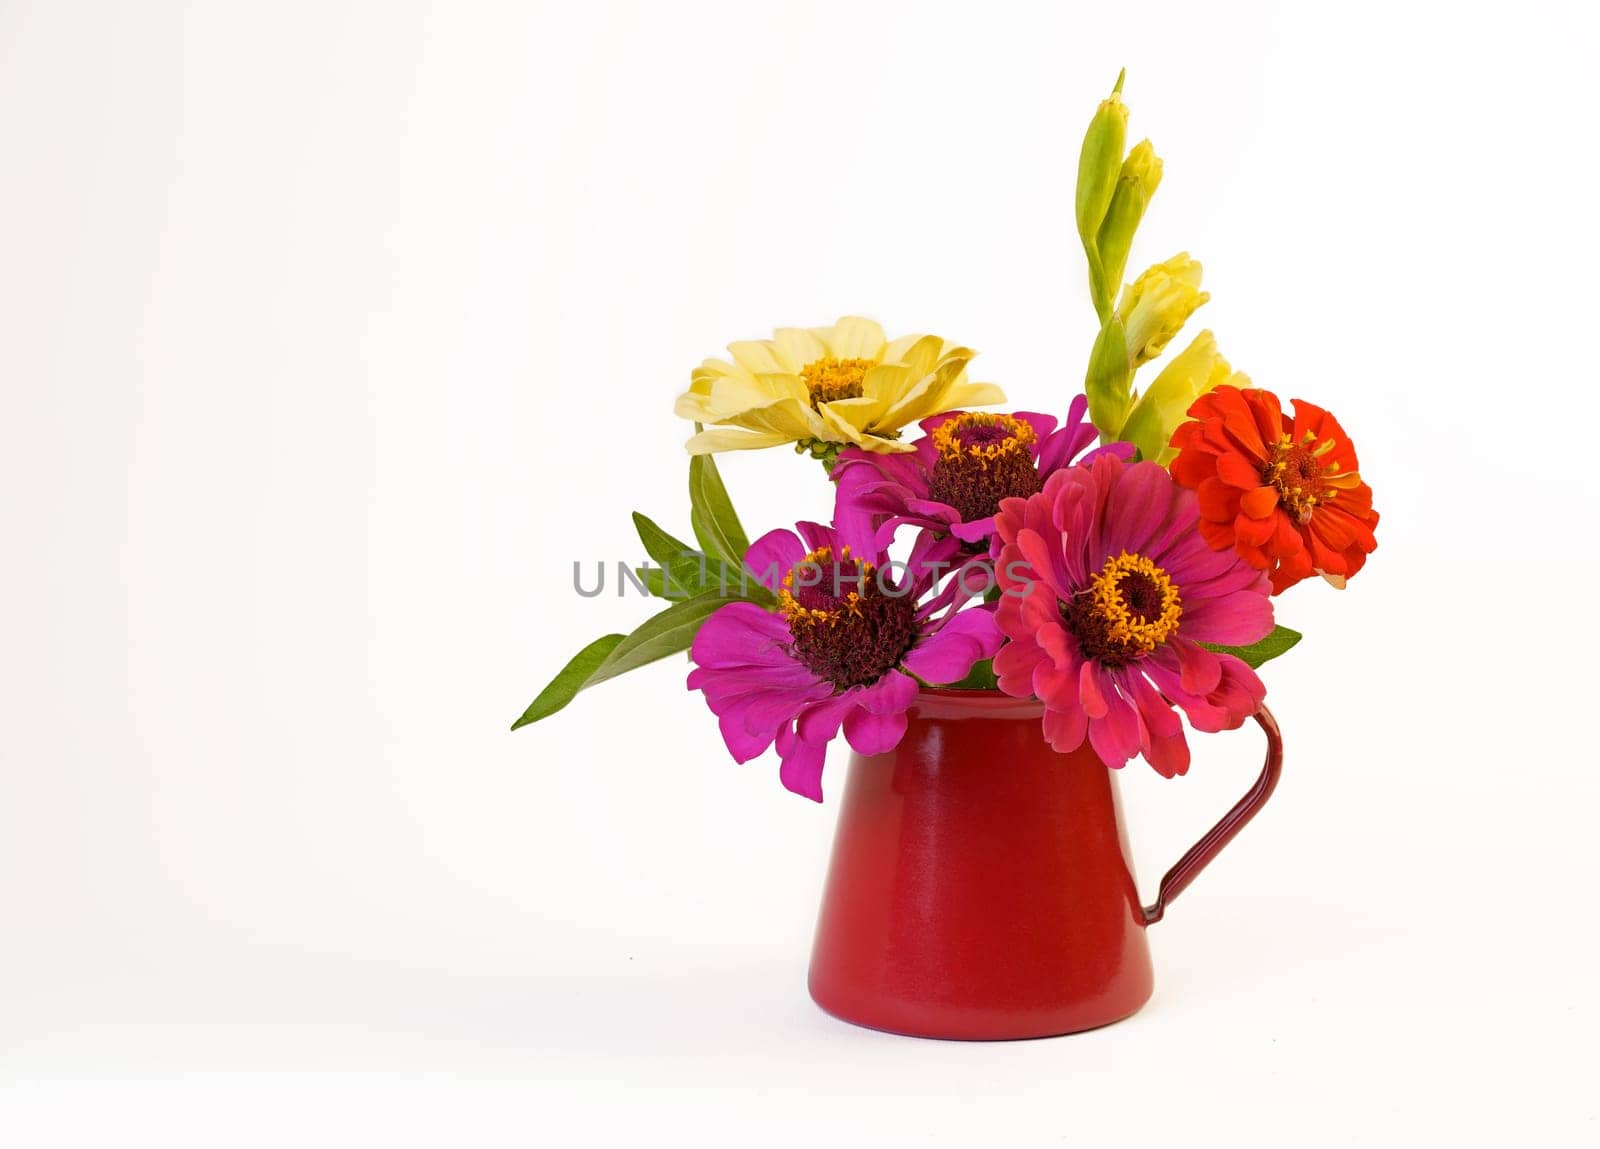 small bouquet of summer flowers in a red vase isolated on a white background by aprilphoto